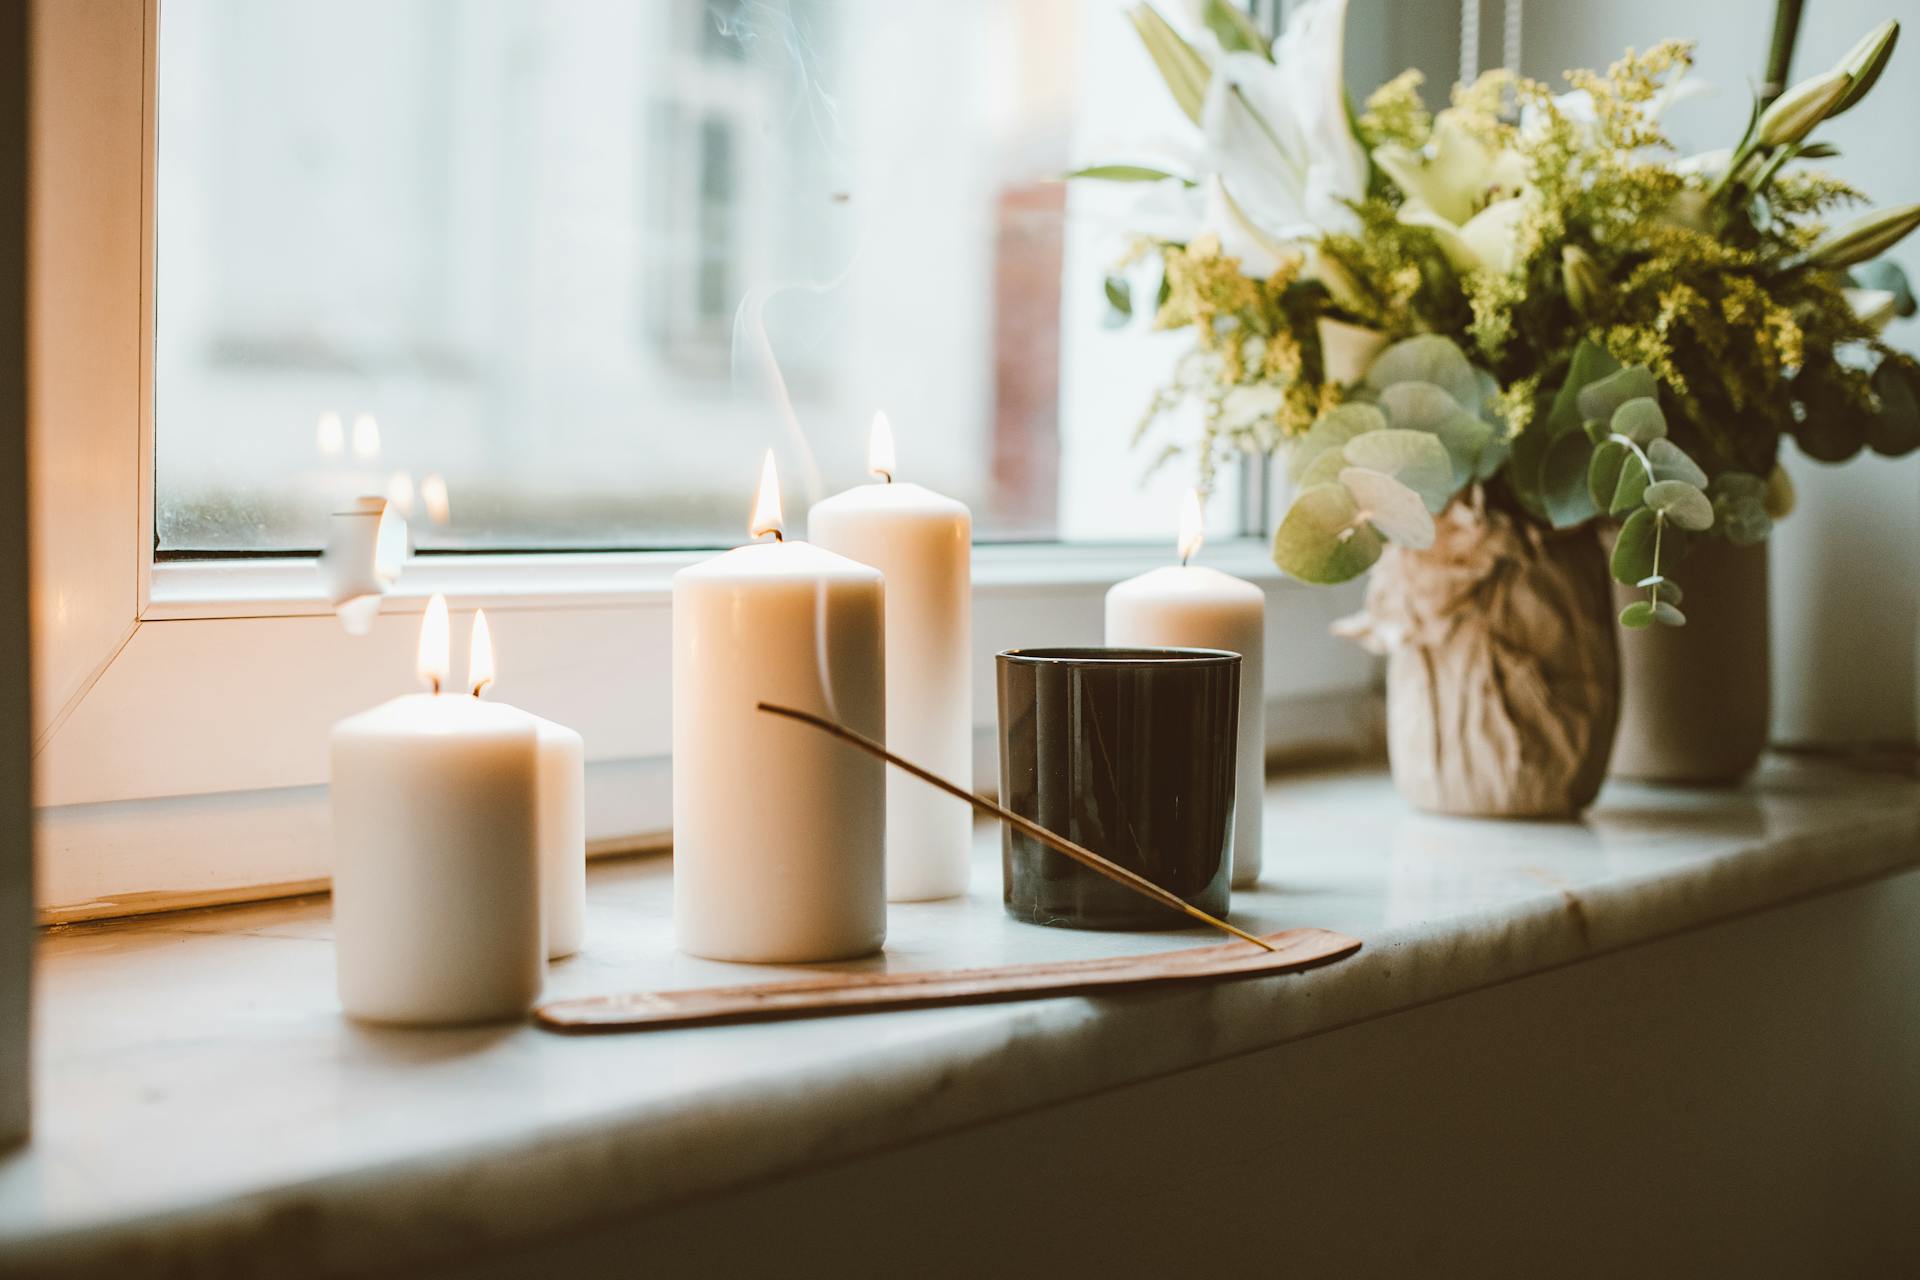 Candles and incense on windowsill | Source: Pexels